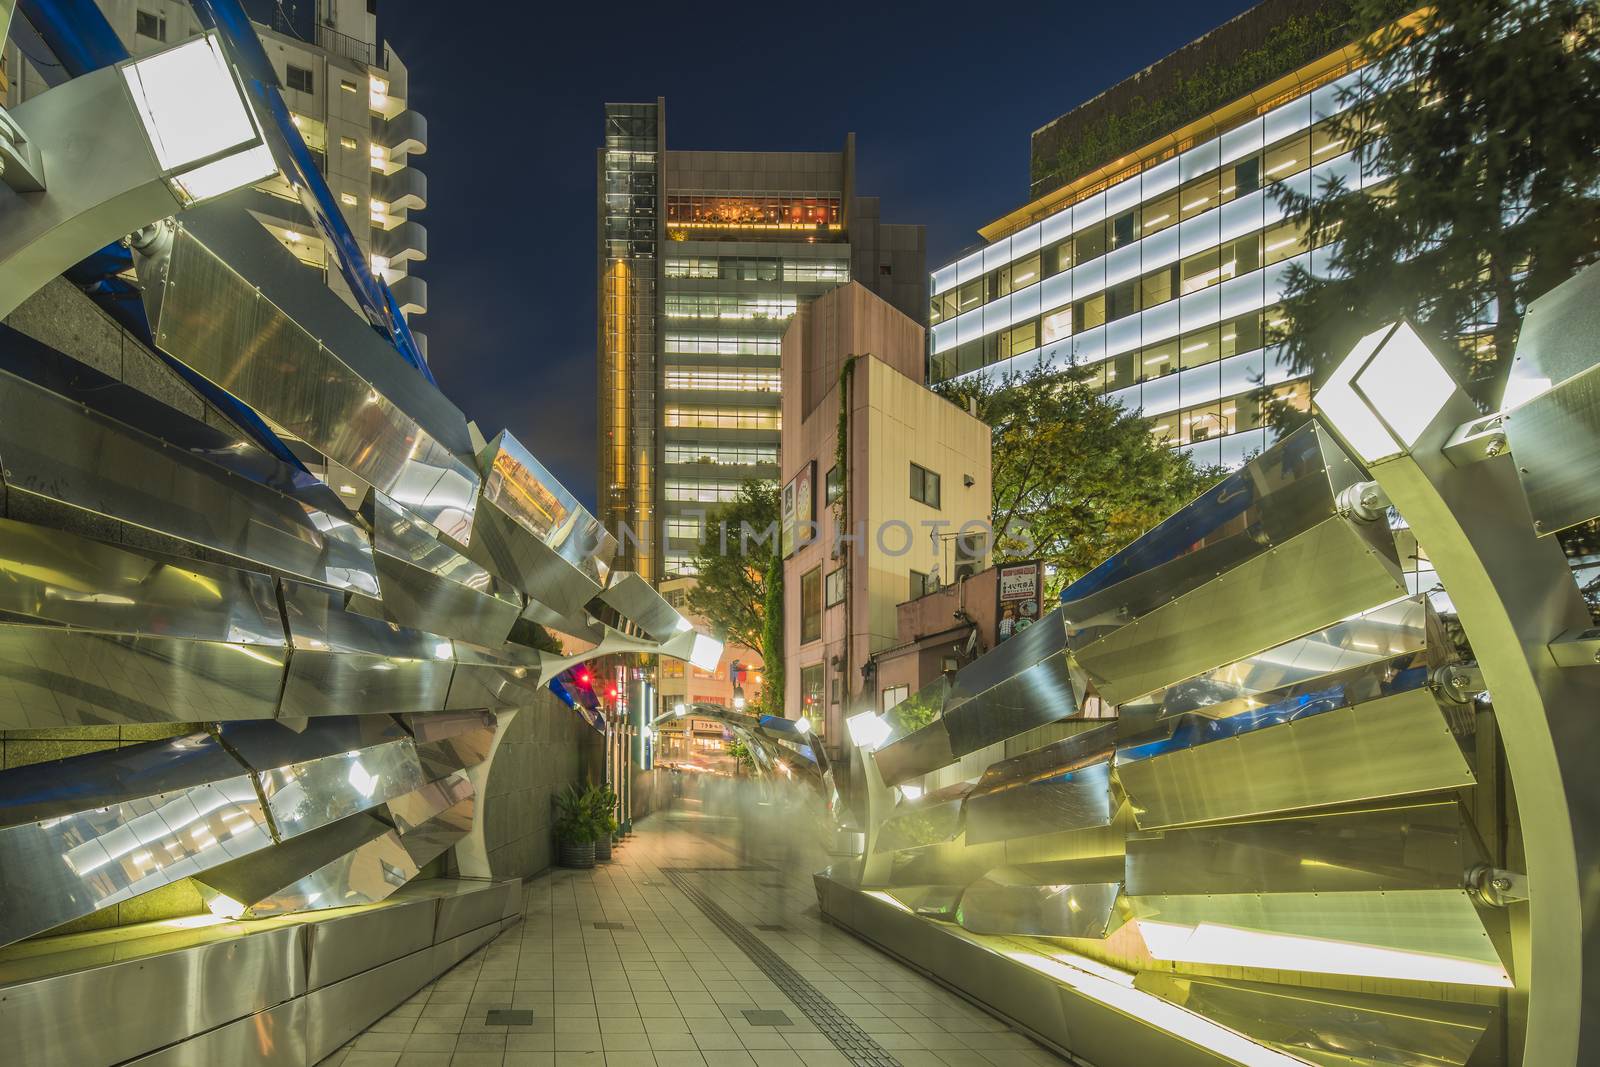 Futuristic architecture with mirroring and transparent blue plastic panels swiveling in Shibuya district in Dogenzaka street leading to Shibuya Crossing Intersection in front of Shibuya Station in a summer evening.